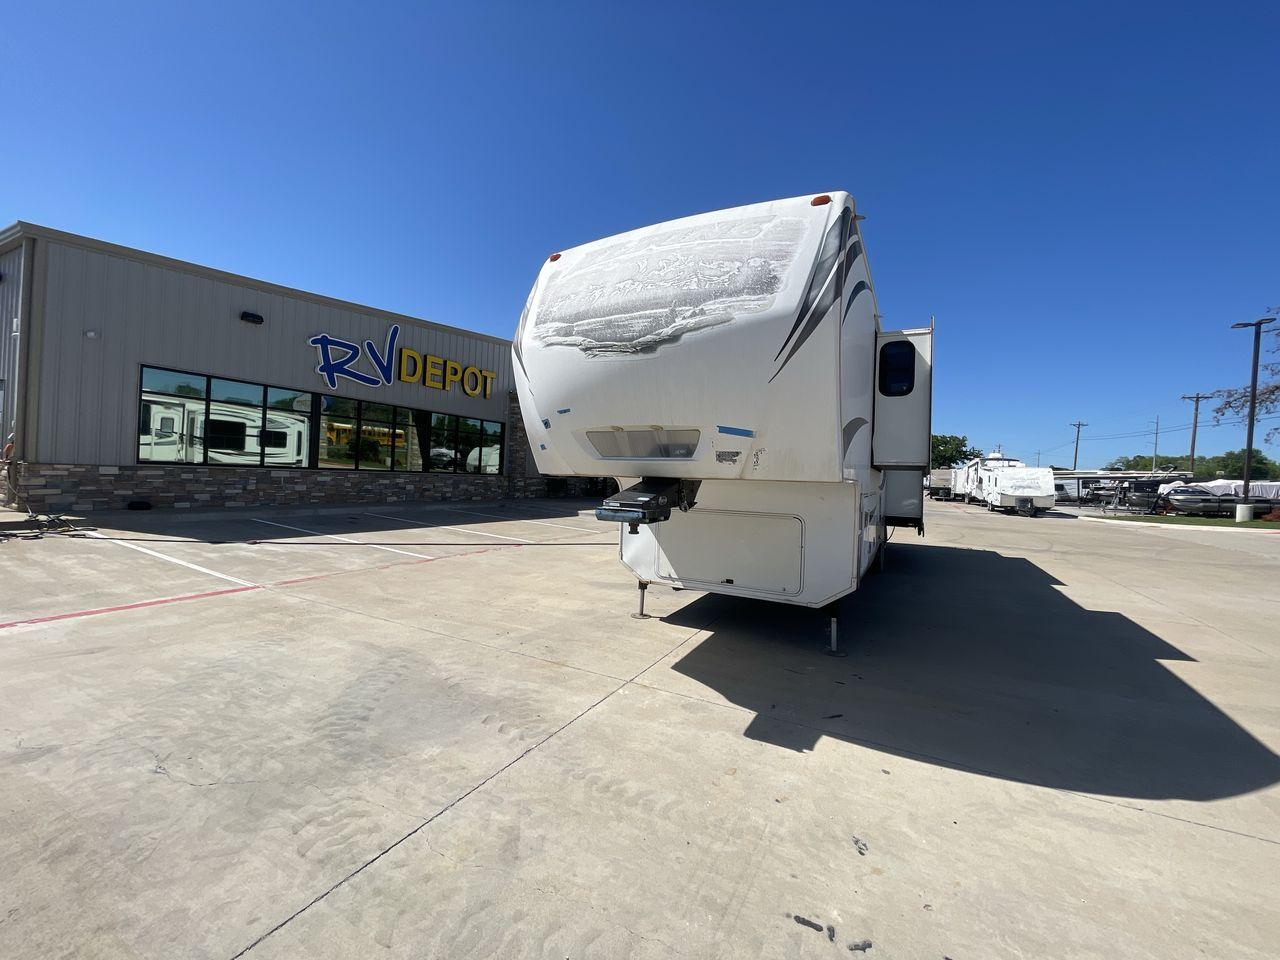 2013 WHITE KEYSTONE ALPNE 3720FB - (4YDF37227DE) , Length: 39.42 ft. | Dry Weight: 12,457 lbs. | Gross Weight: 15,500 lbs. | Slides: 4 transmission, located at 4319 N Main Street, Cleburne, TX, 76033, (817) 221-0660, 32.435829, -97.384178 - Explore more reasons that emphasize the benefits of having this RV as your own. (1) Its large living area features a slide-out with a sofa, recliner, and entertainment center with a fireplace and 32"" LCD TV. (2) It has U-shaped dinette with booth seating provides ample space for dining and ent - Photo #0